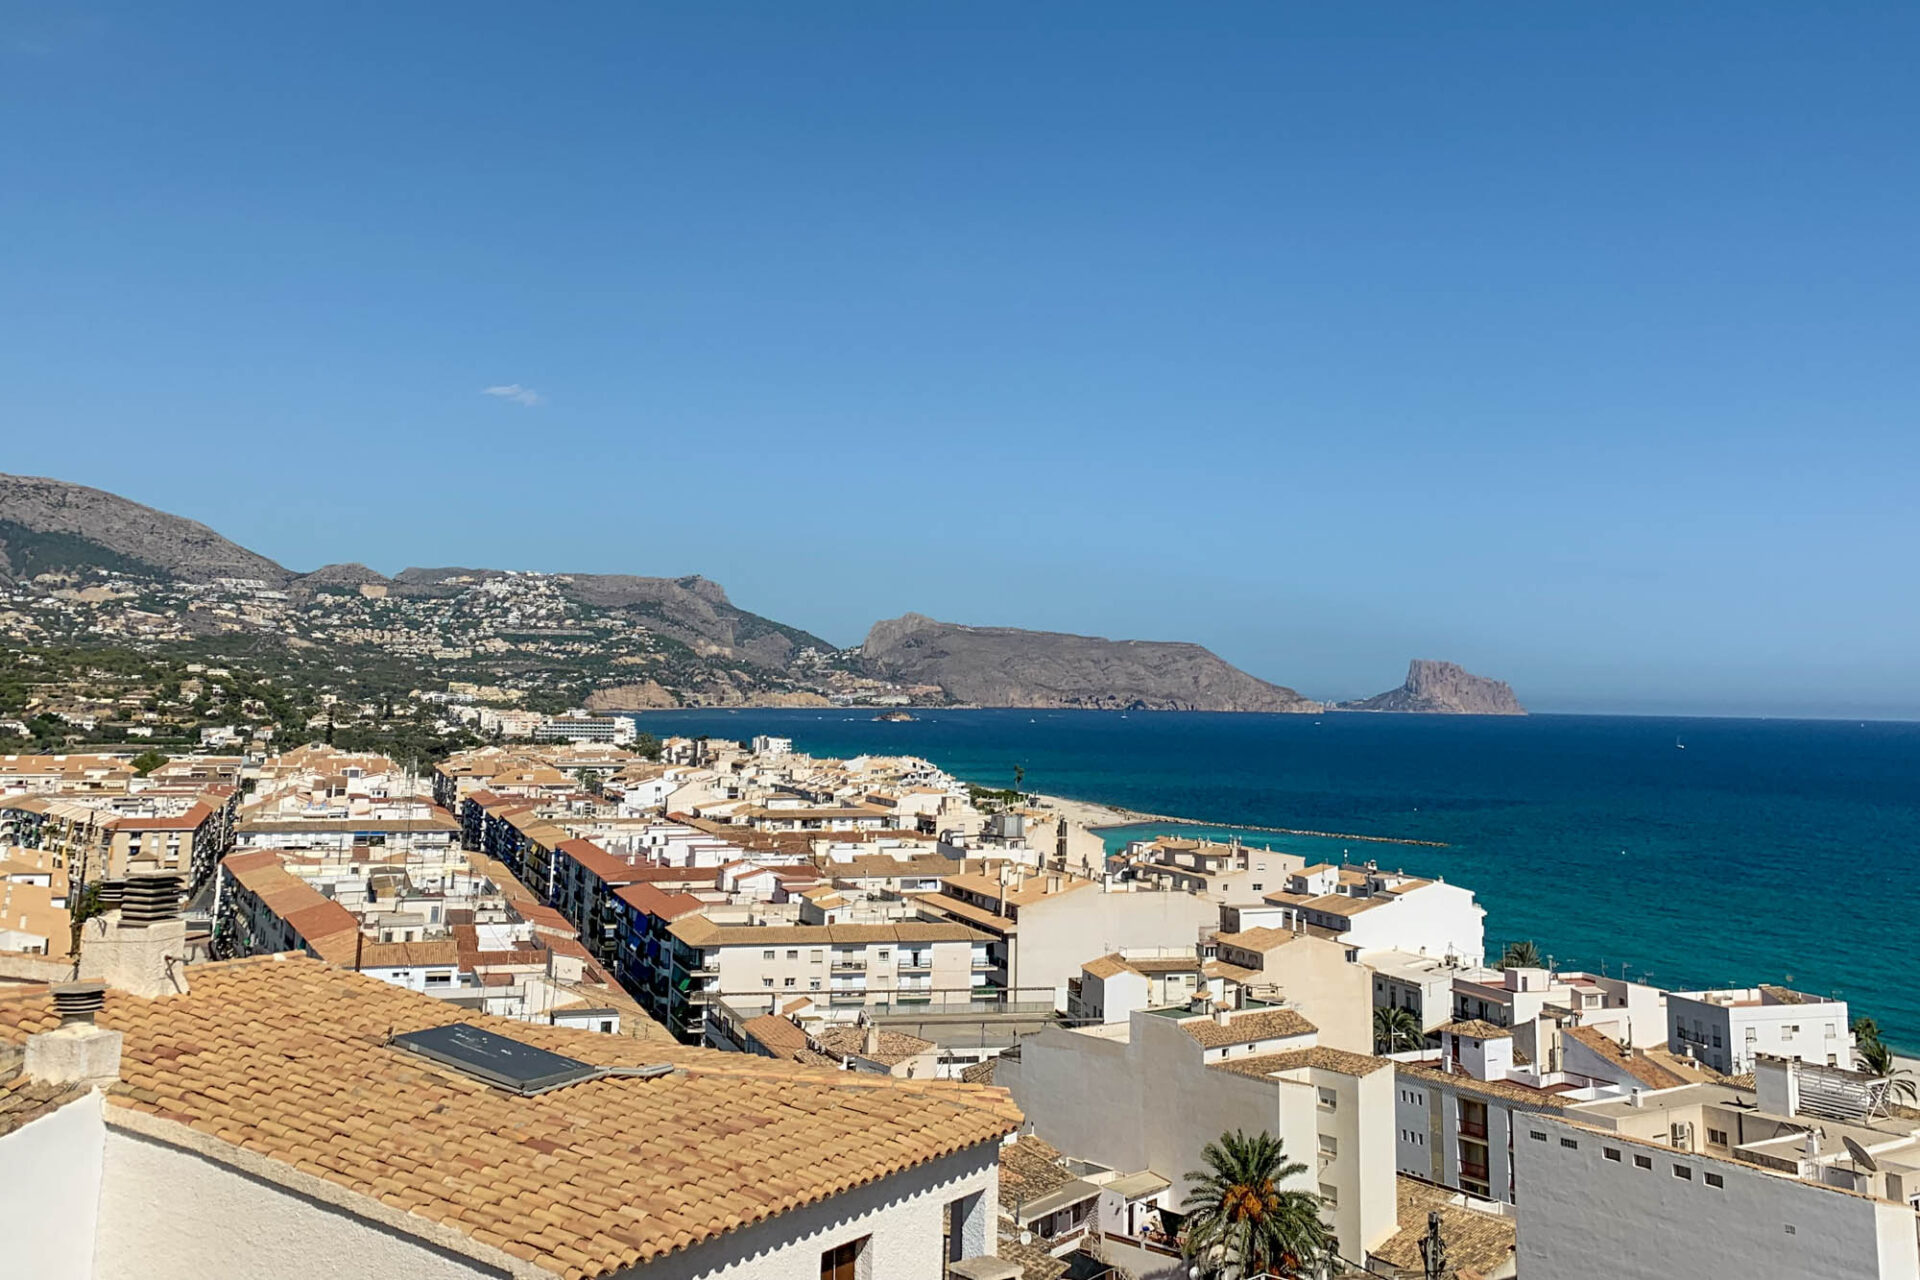 Altea, Spain – The Ultimate Travel Guide (+ Best Things to Do!)